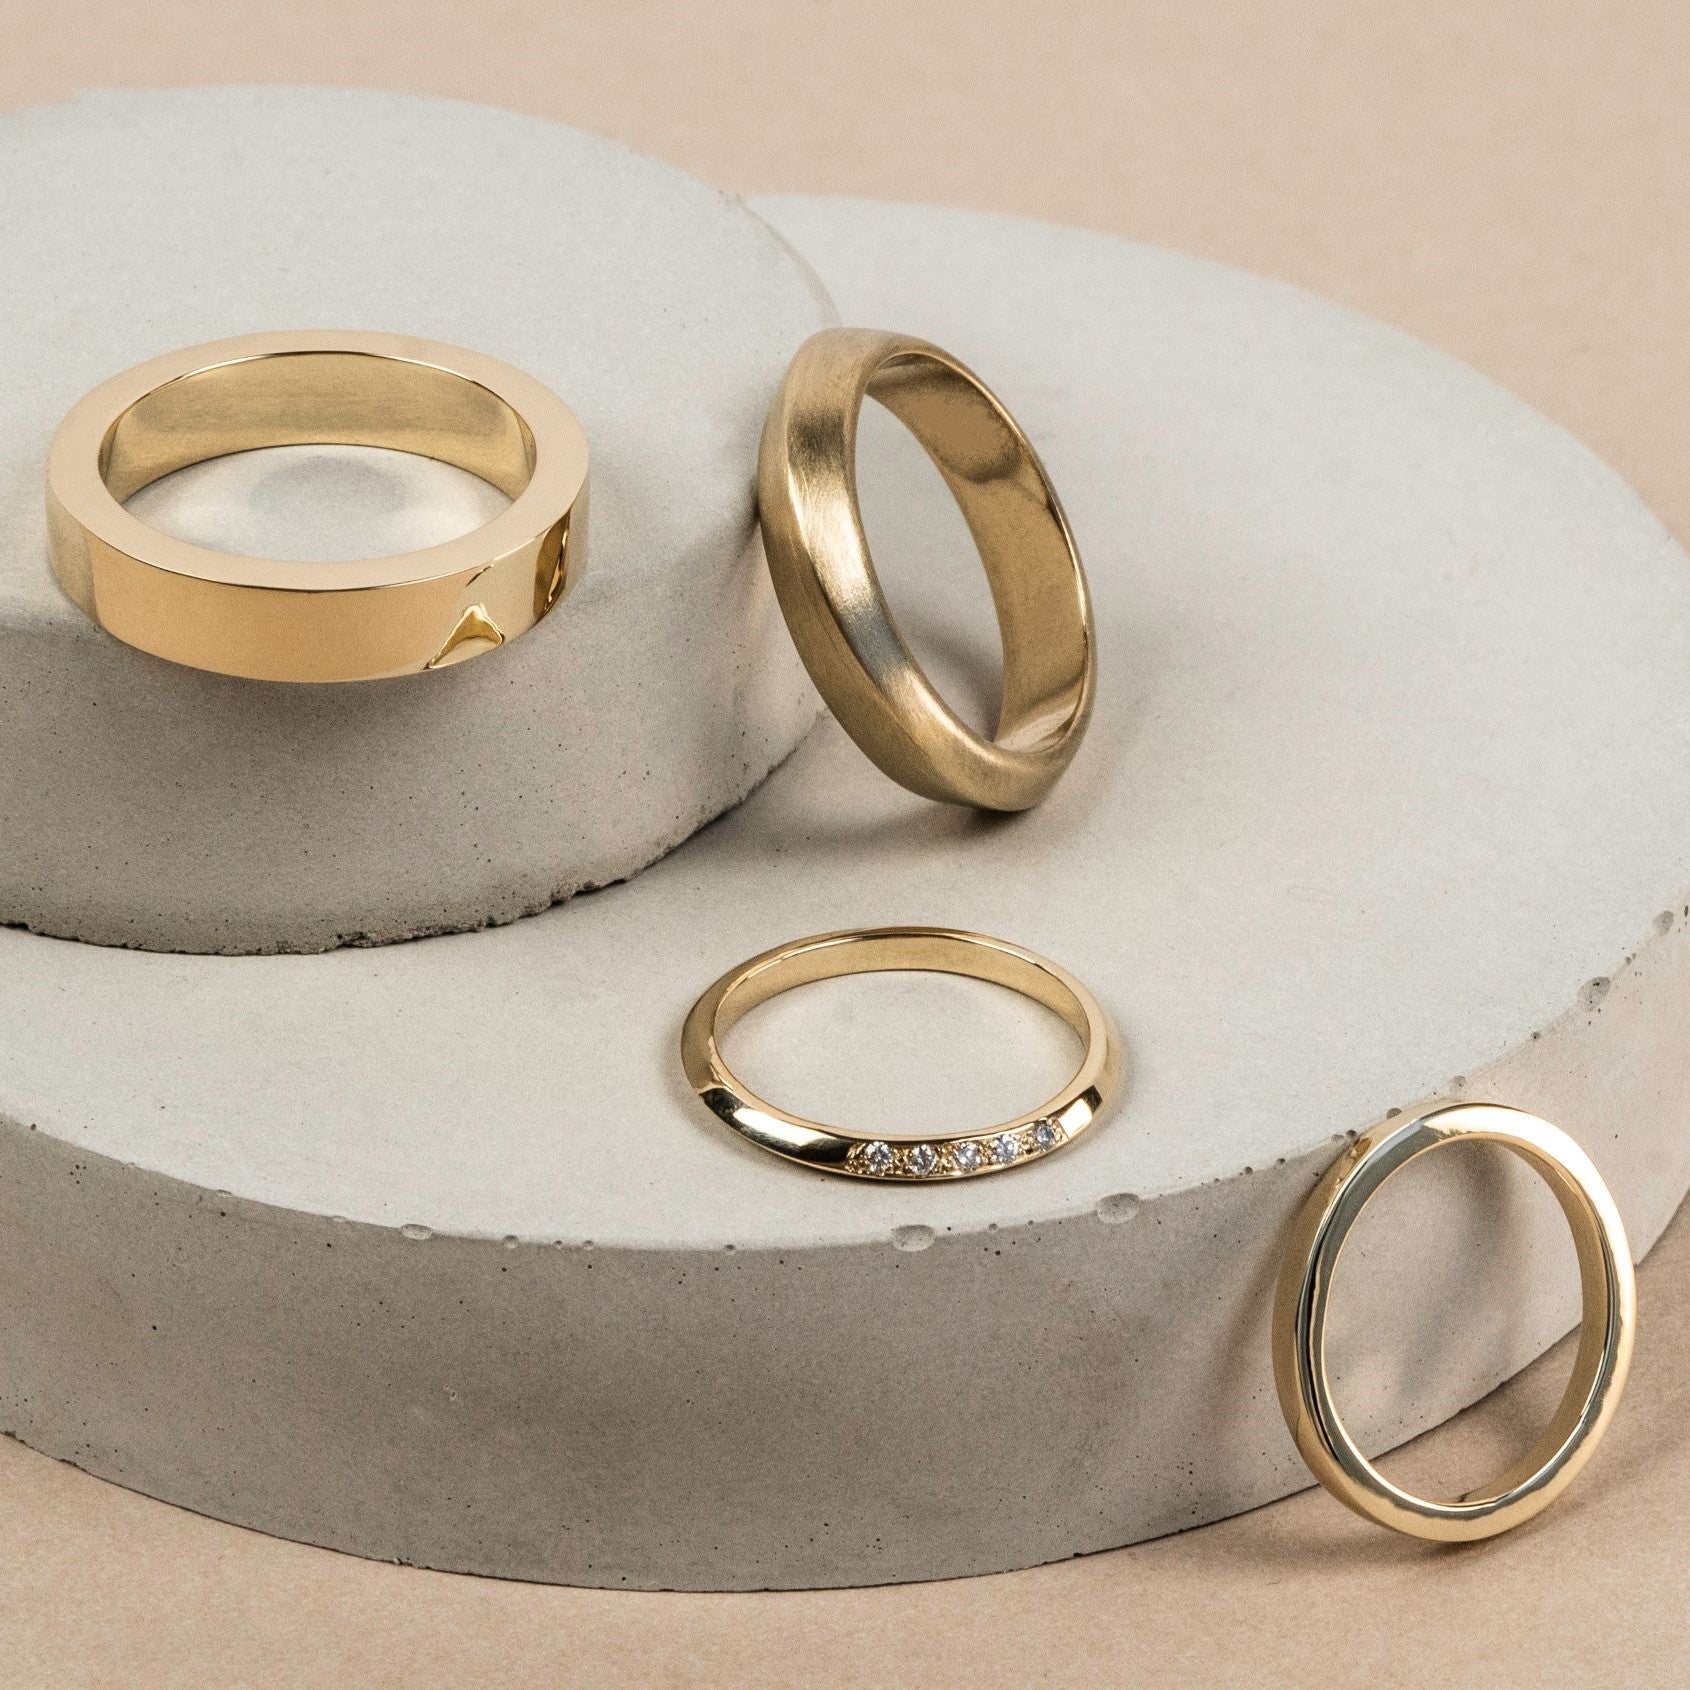 How to choose a wedding band: Our top 3 tips